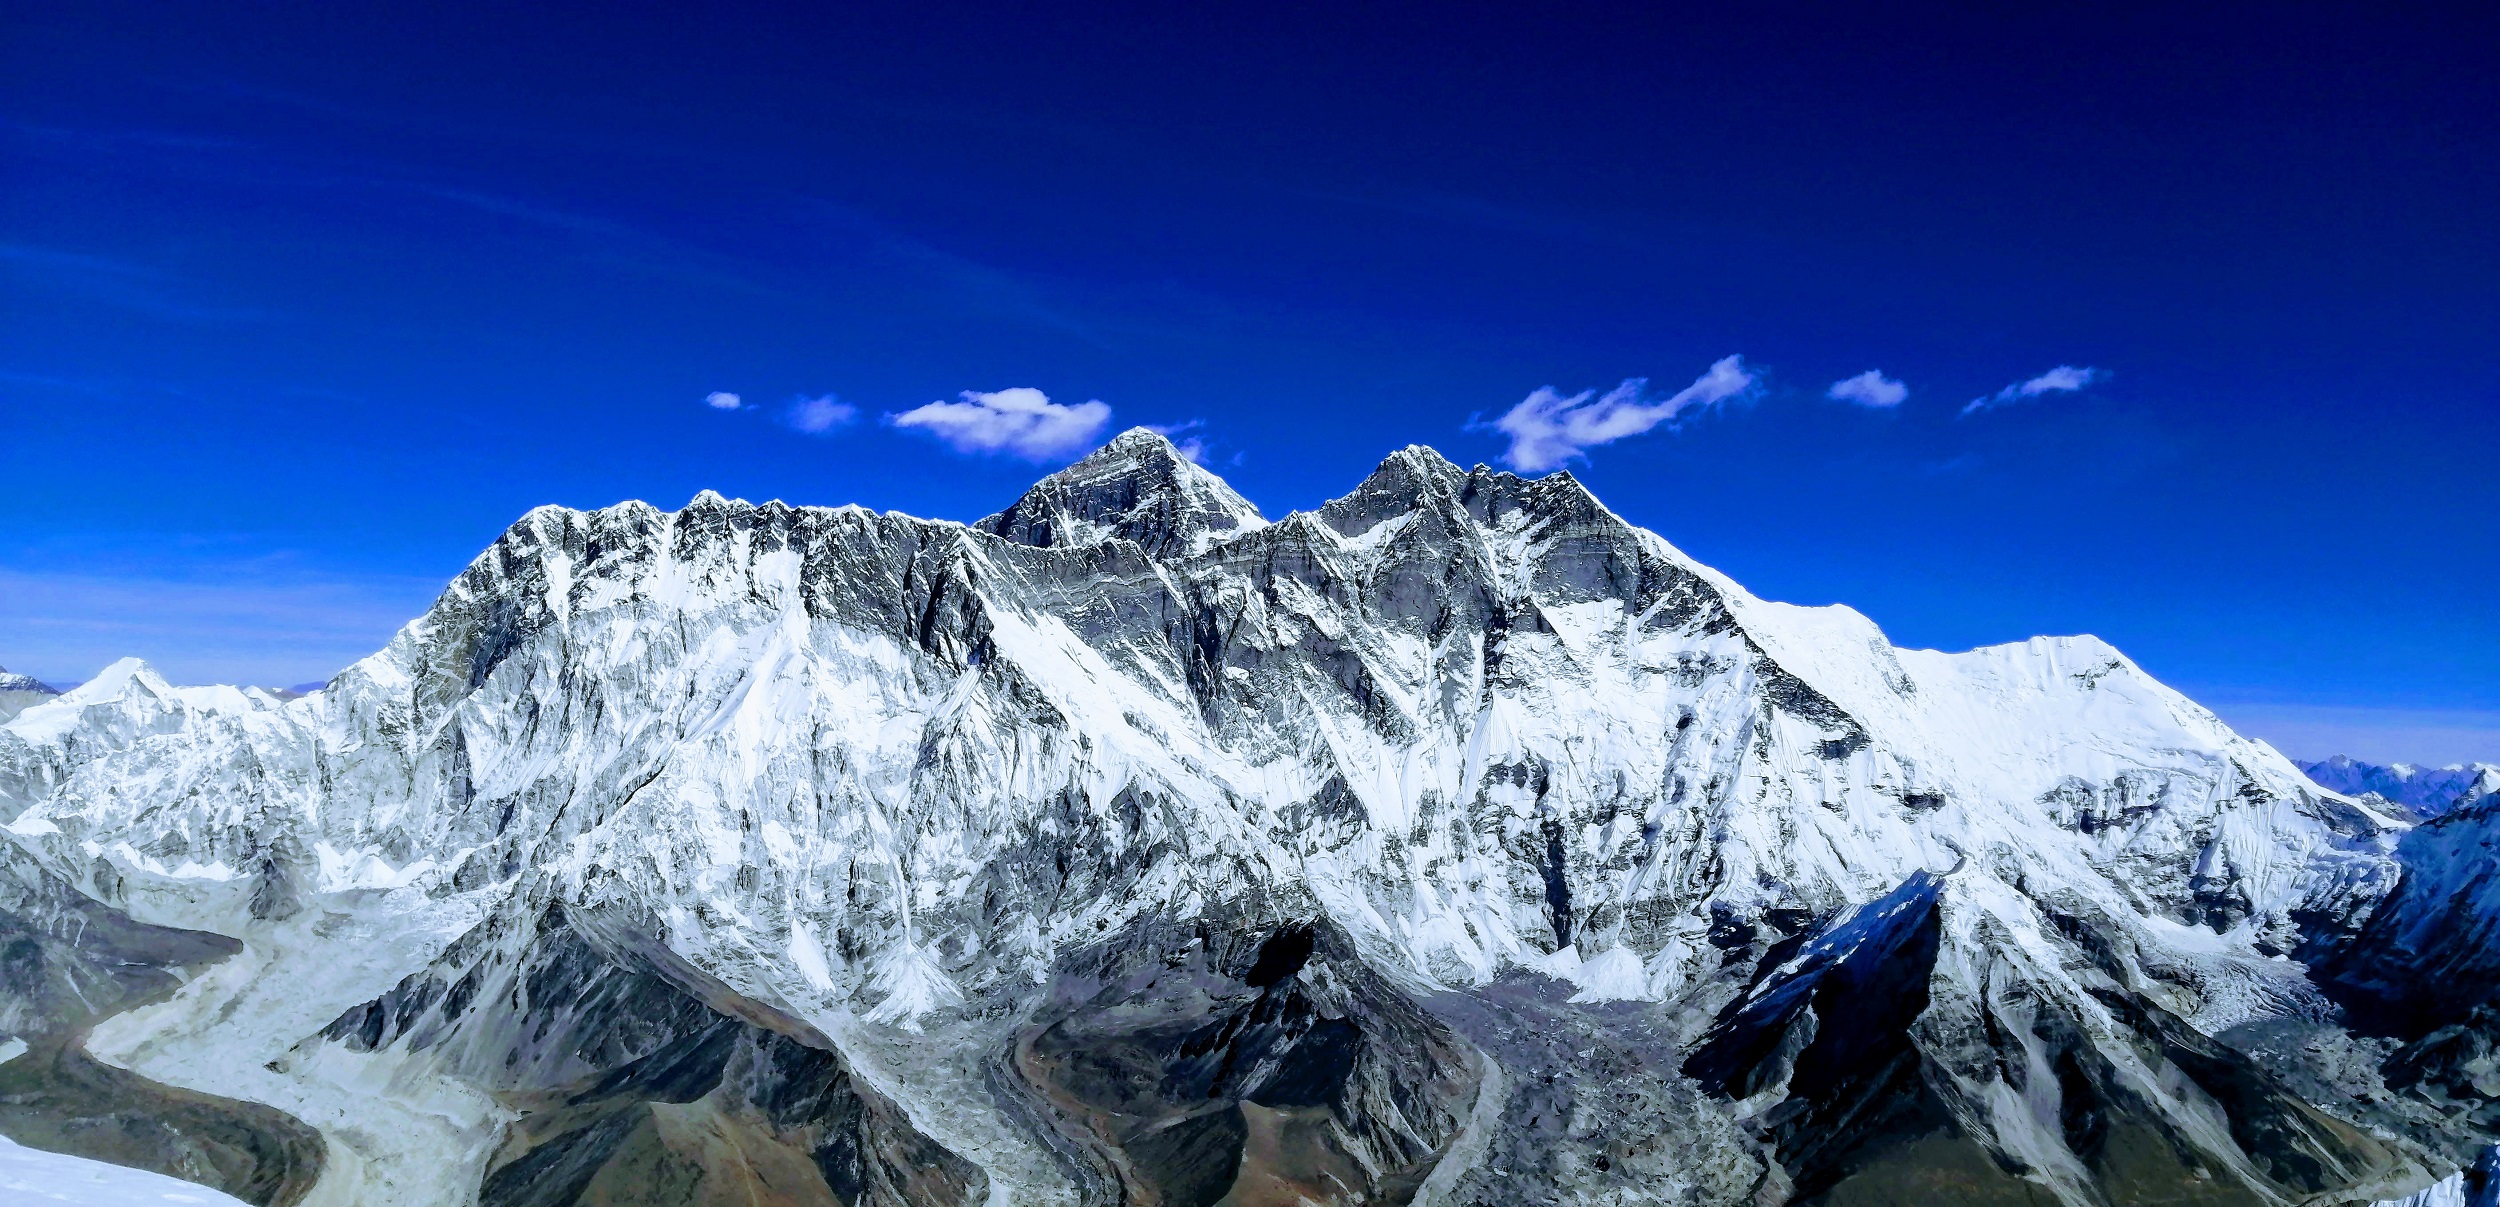 View of Everest from Ama Dablam 